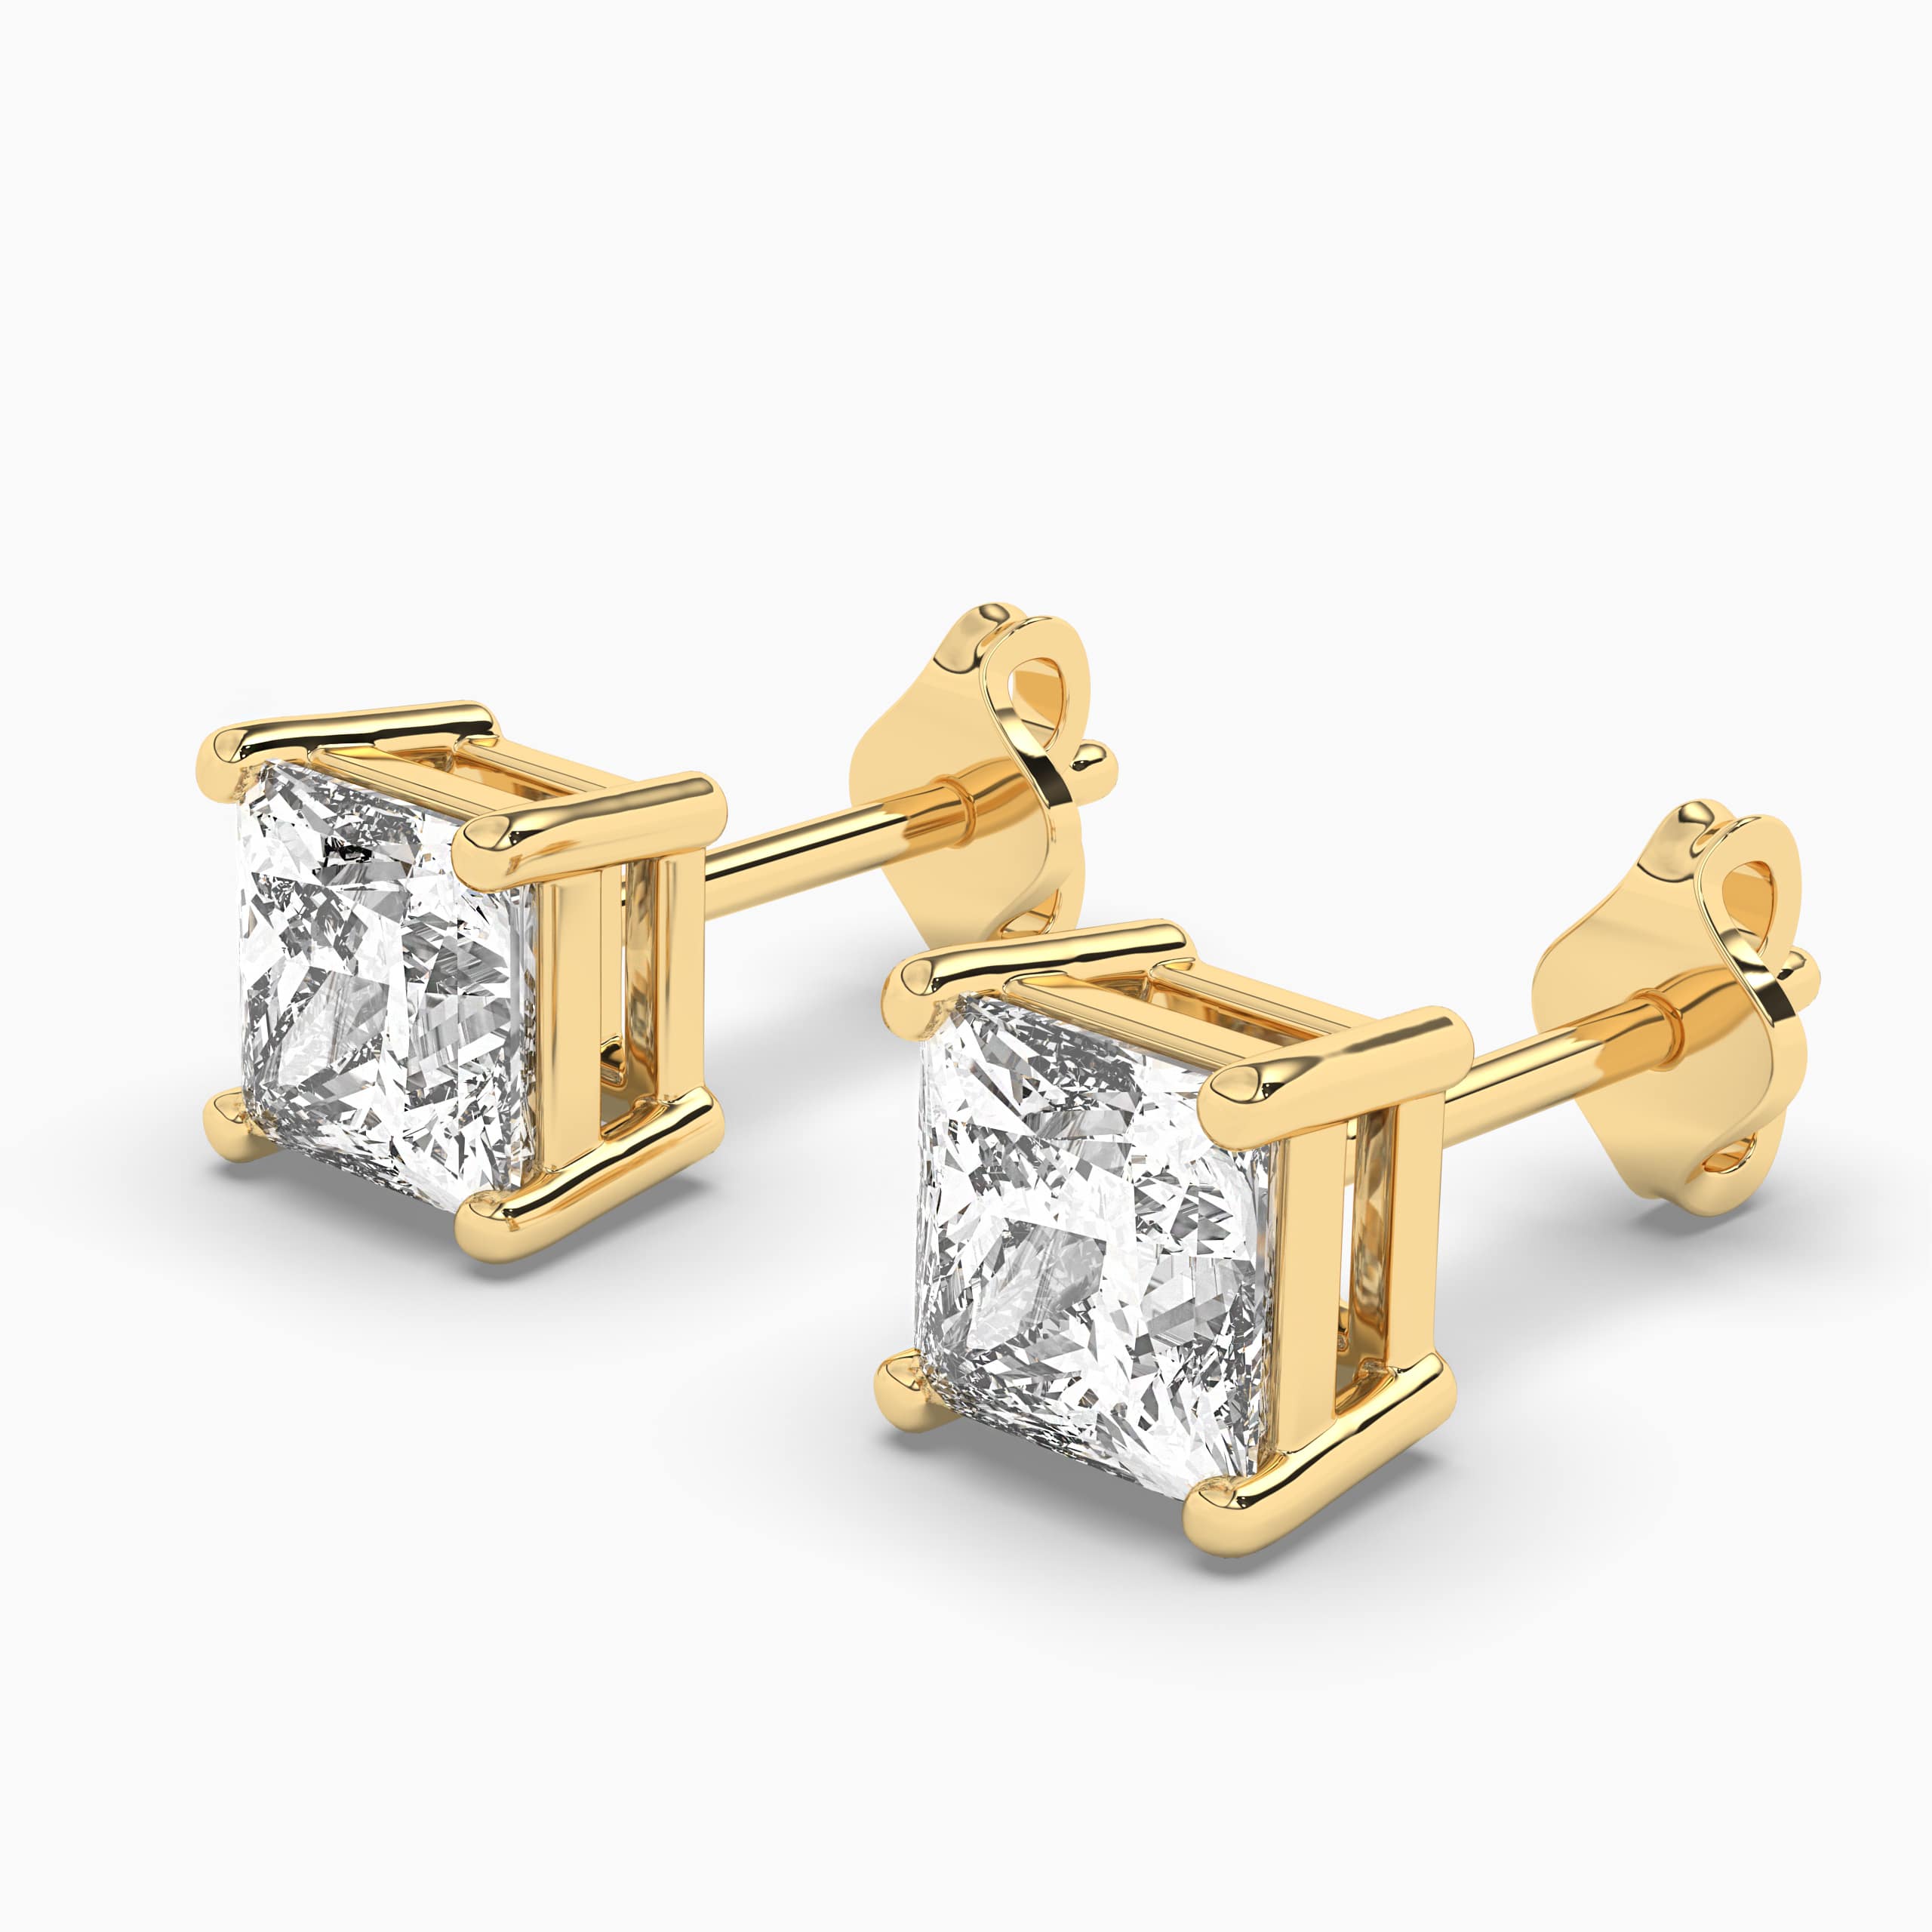 Princess-Cut Diamond Solitaire Stud Earrings in Yellow Gold